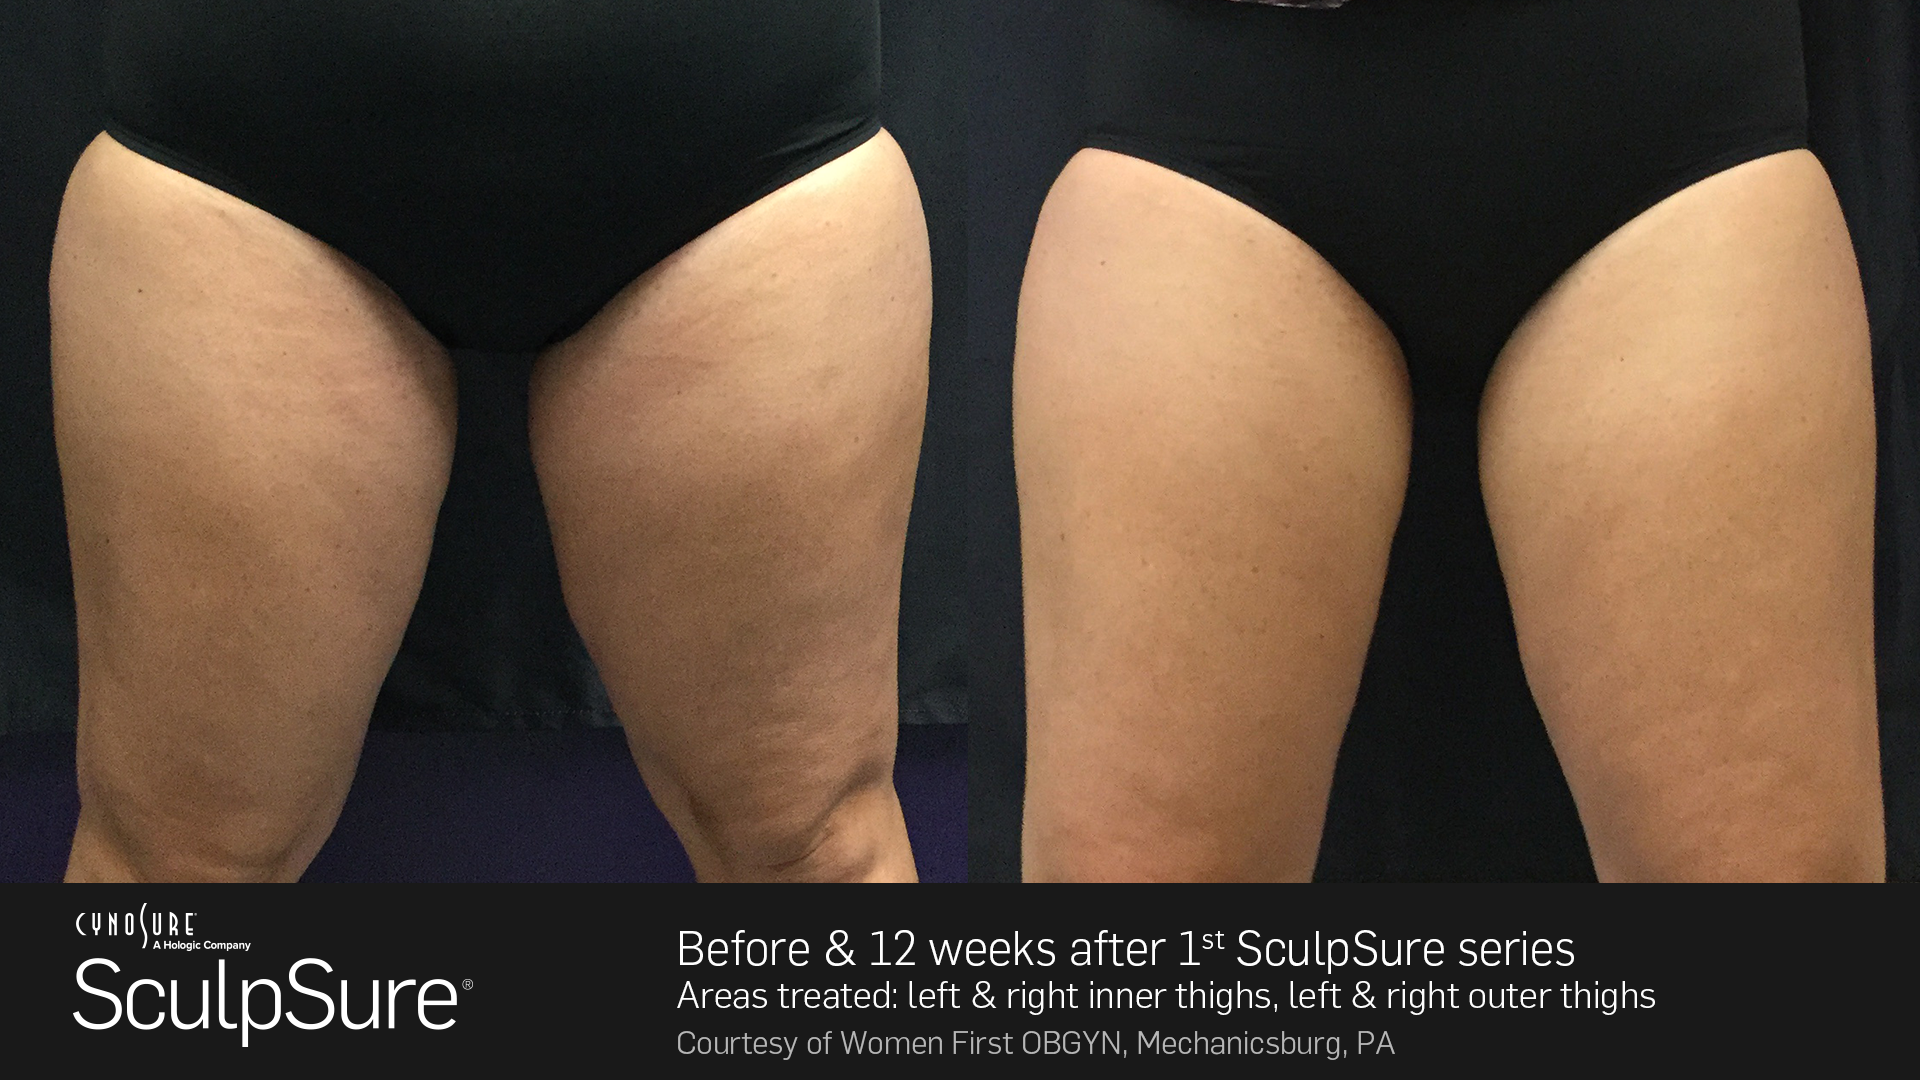 https://www.sculpsure.com/wp-content/uploads/2018/06/Courtesy-of-Women-First-OBGYN_Mechanicsburg_PA_nobadge-1.png